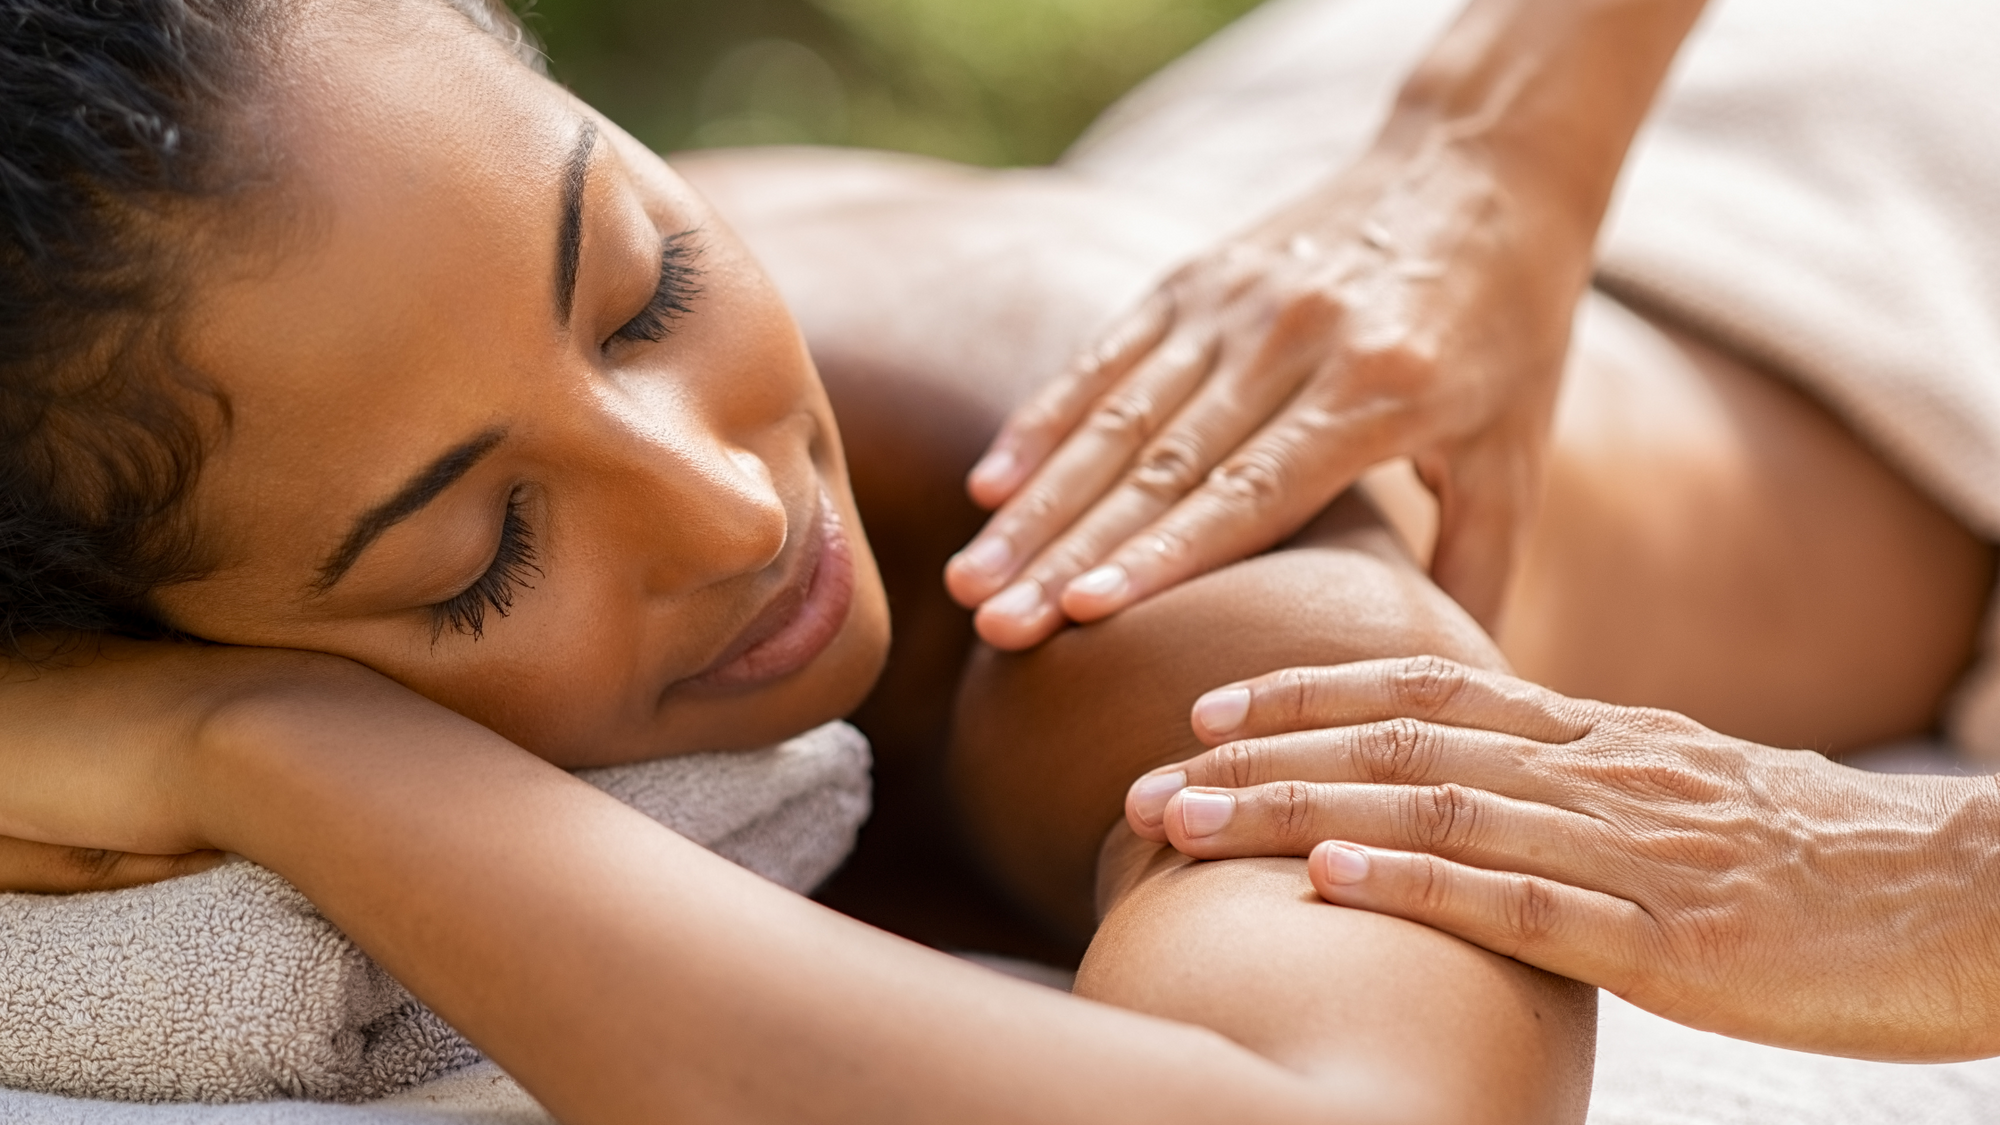 Do’s and Don'ts: Professional Massage Etiquette